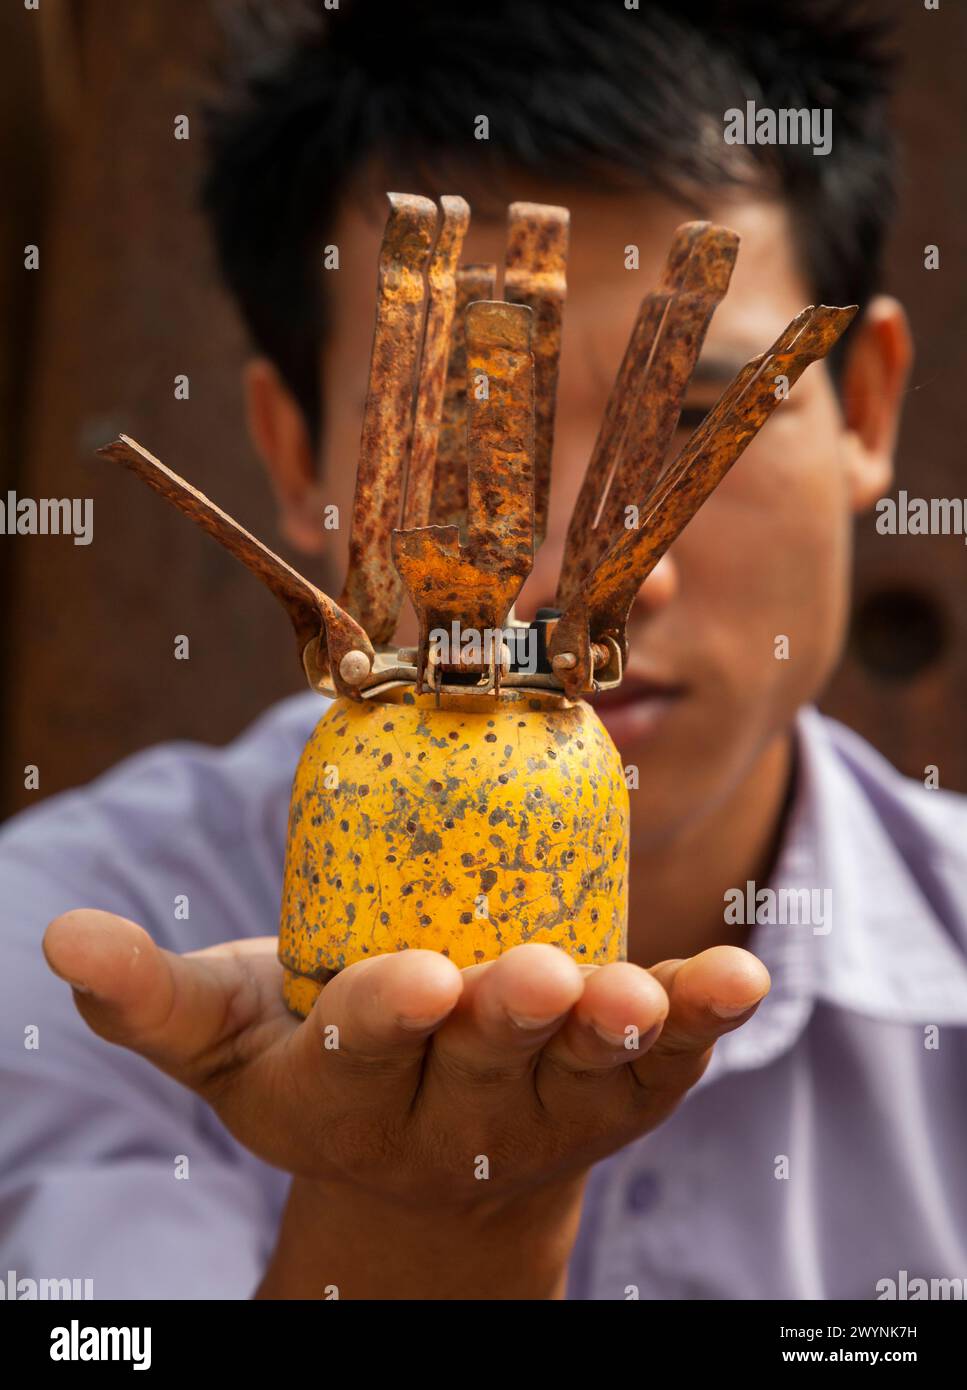 Deadly legacy from the Vietnam War. Local villager holds an American BLU3 cluster bomb. Xiangkhouang, Province, Laos. Stock Photo